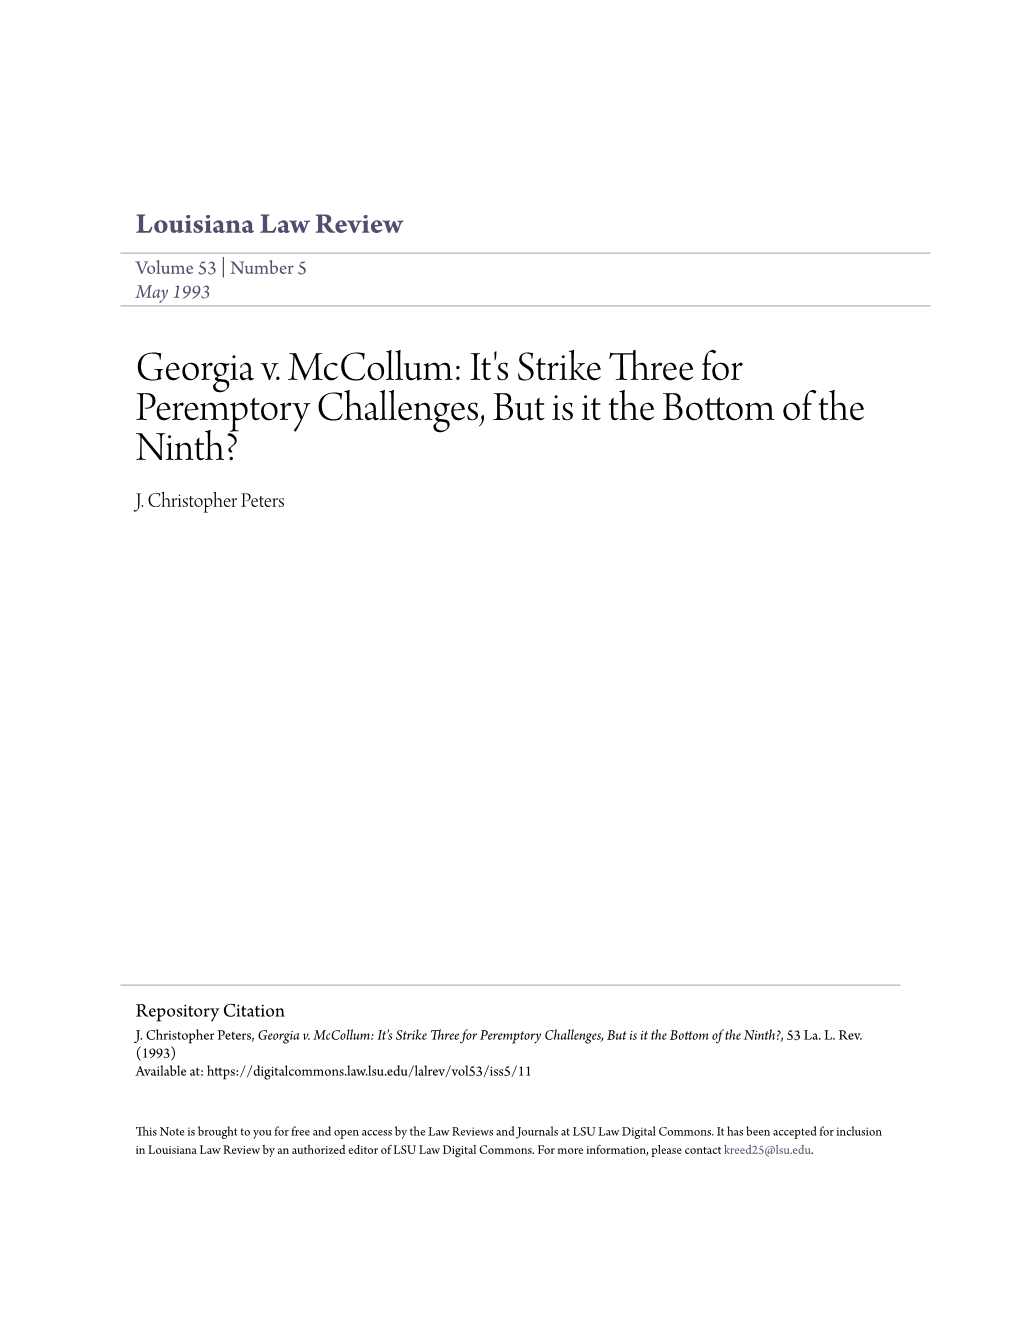 Georgia V. Mccollum: It's Strike Three for Peremptory Challenges, but Is It the Bottom of the Ninth? J